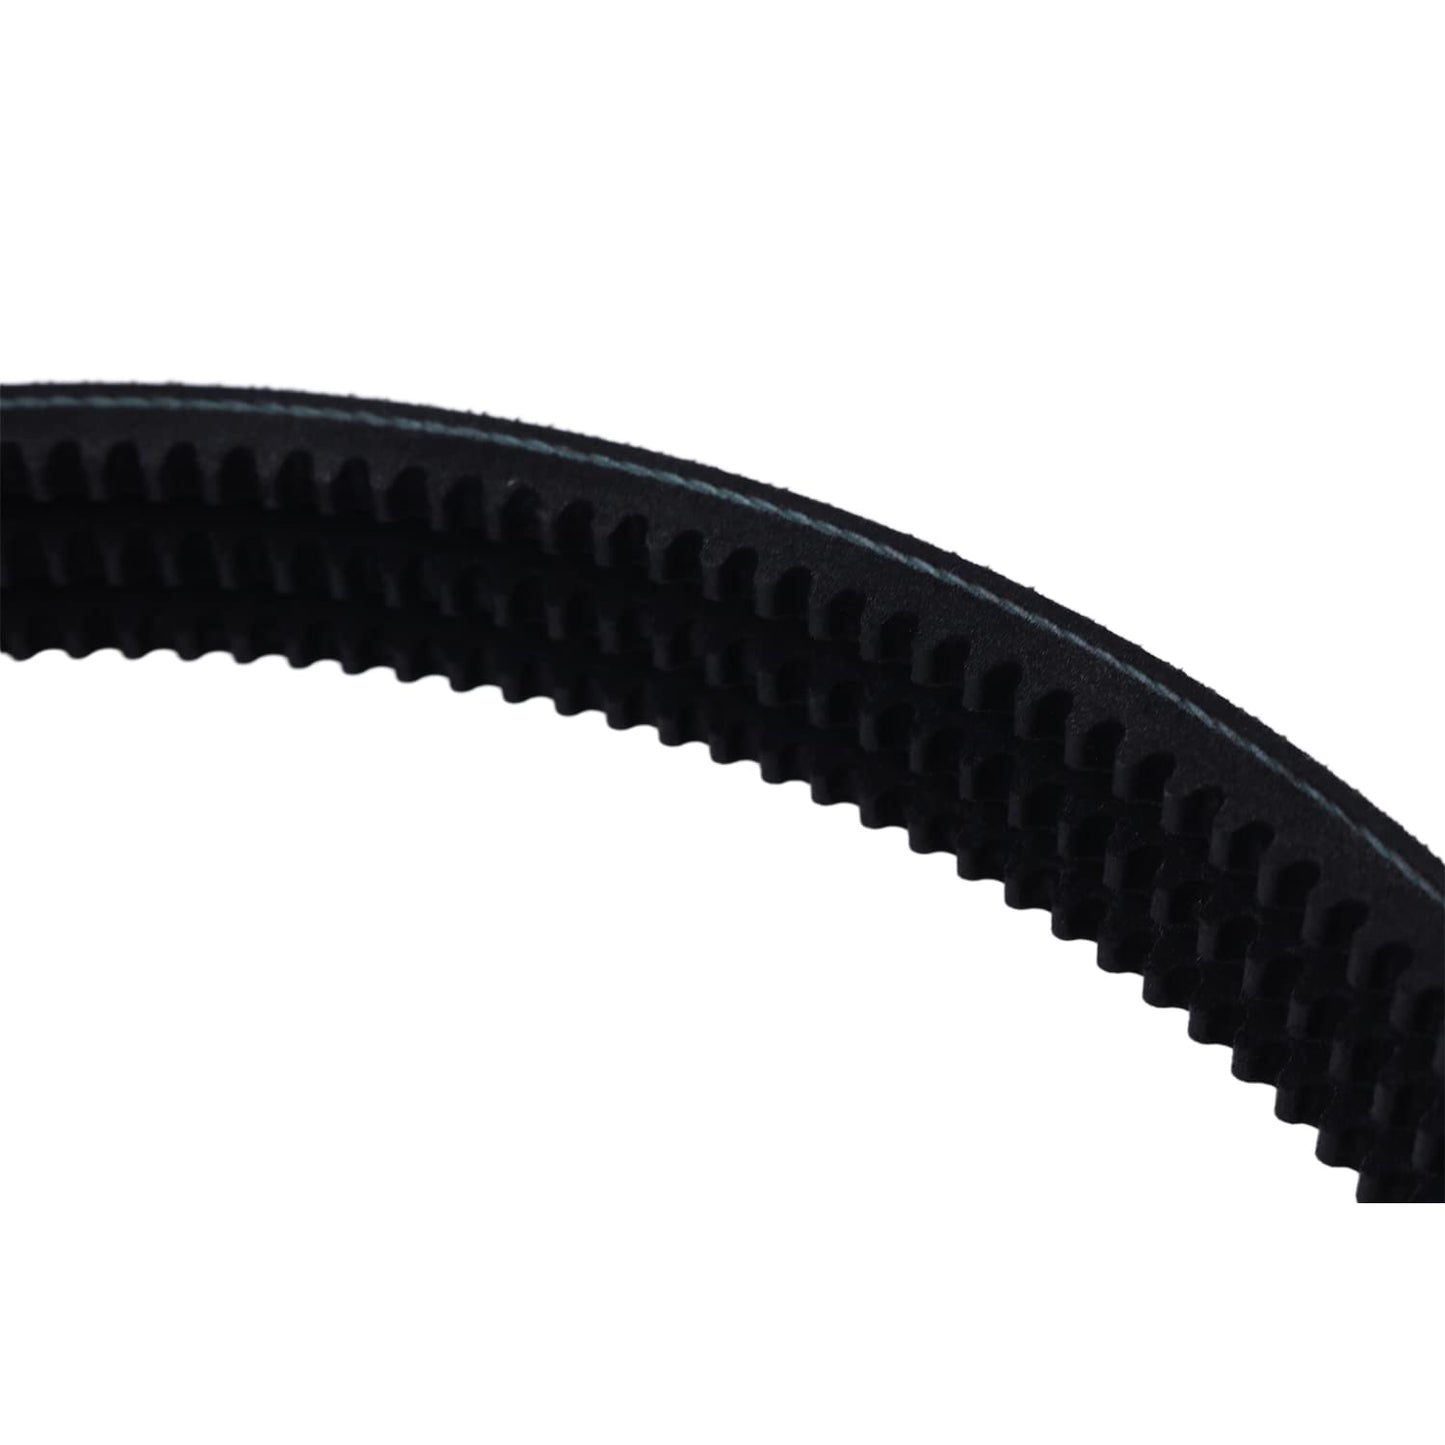 78-1669 Drive Belt Compatible with Thermo King T-1000,T-1000 spectrum,T-1000M,T-1000R